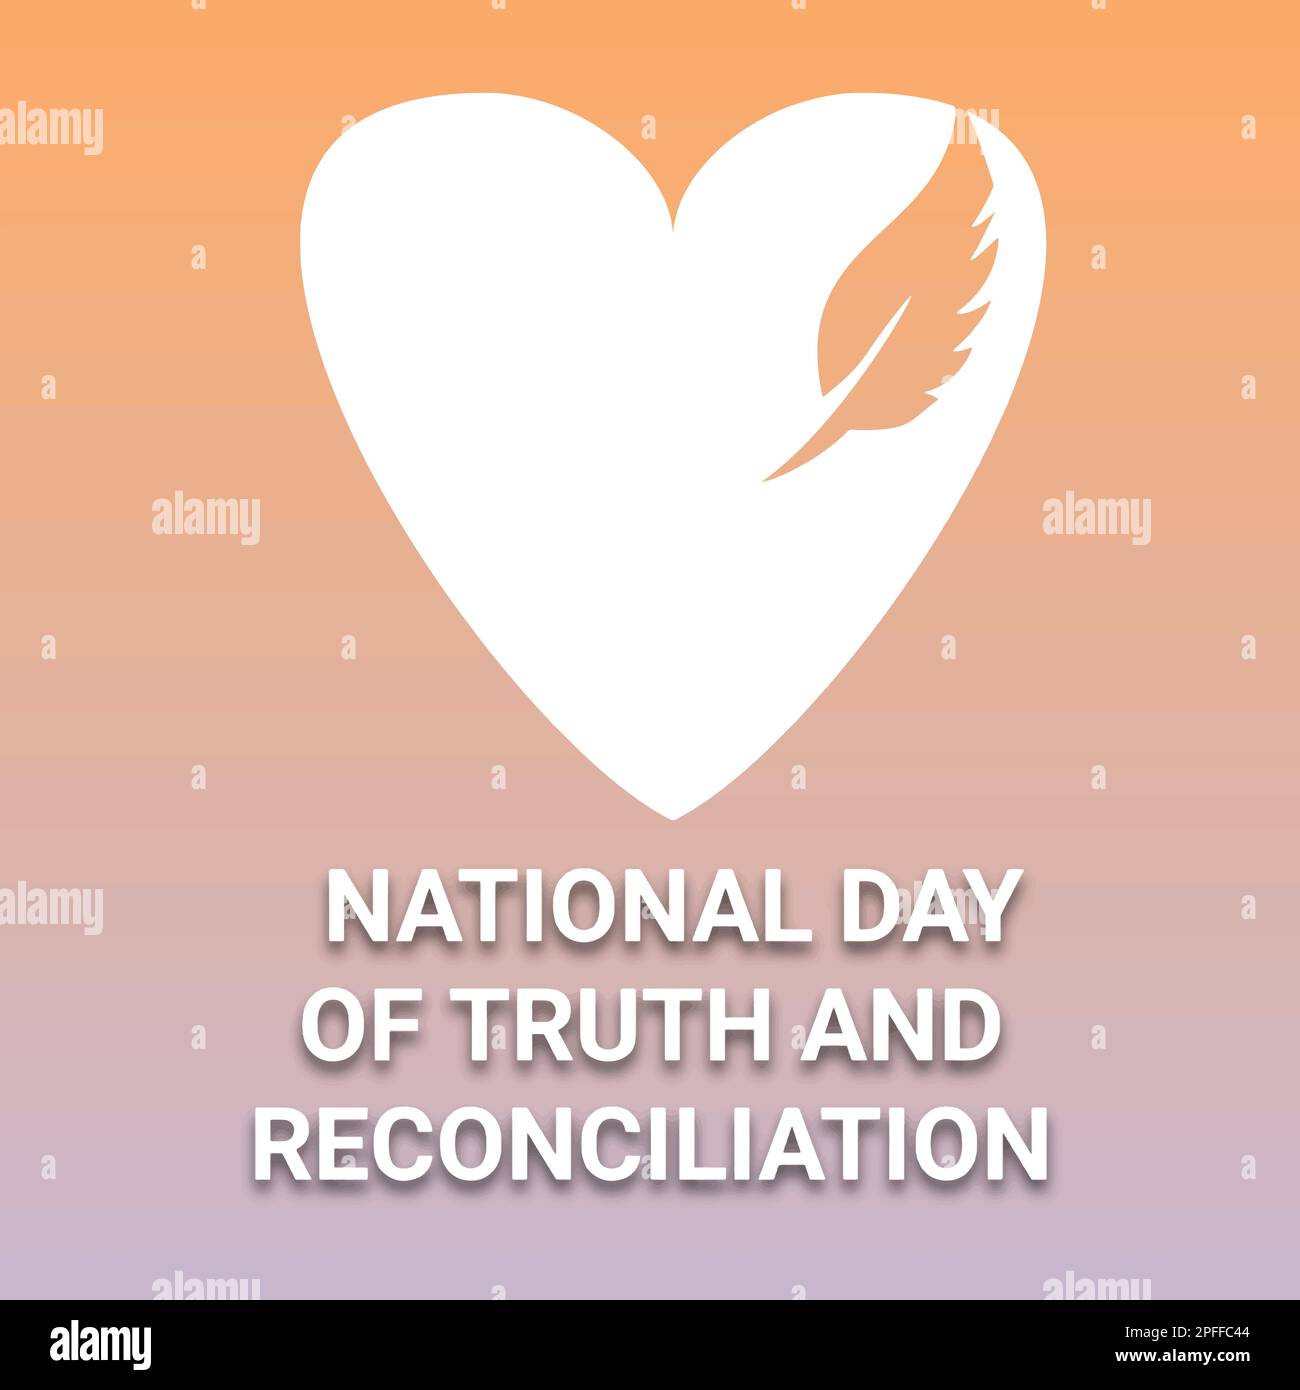 national day of truth and reconciliation modern creative banner, design concept, social media post with white text on an gradient color background Stock Vector